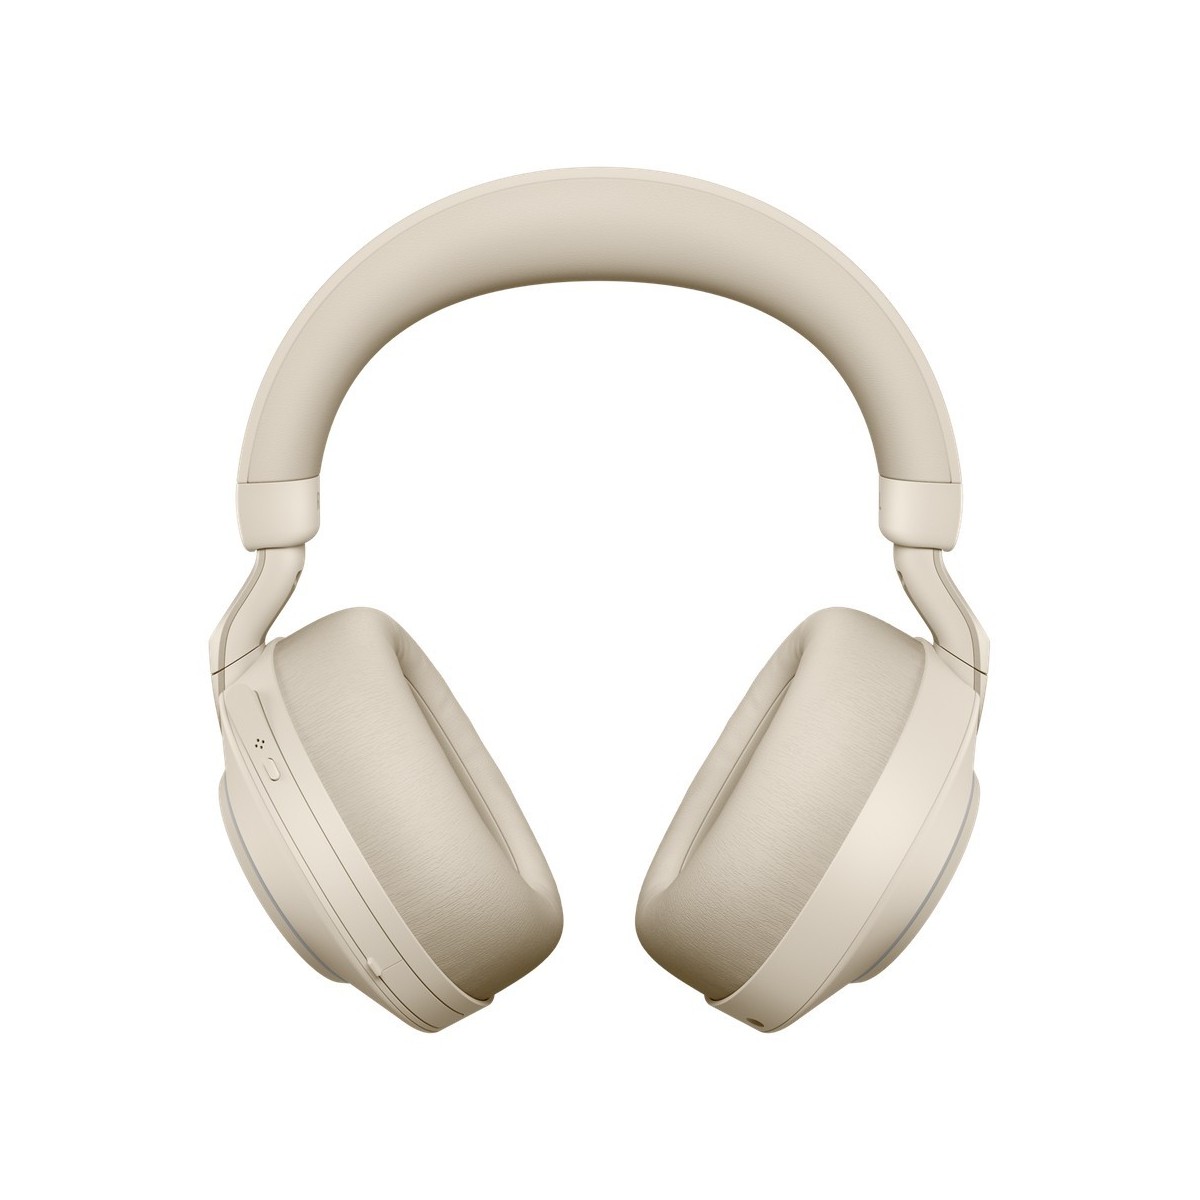 Jabra Evolve2 85 - MS Stereo - Headset - Head-band - Office/Call center - Beige - Binaural - Bluetooth pairing - Play/Pause - Tr